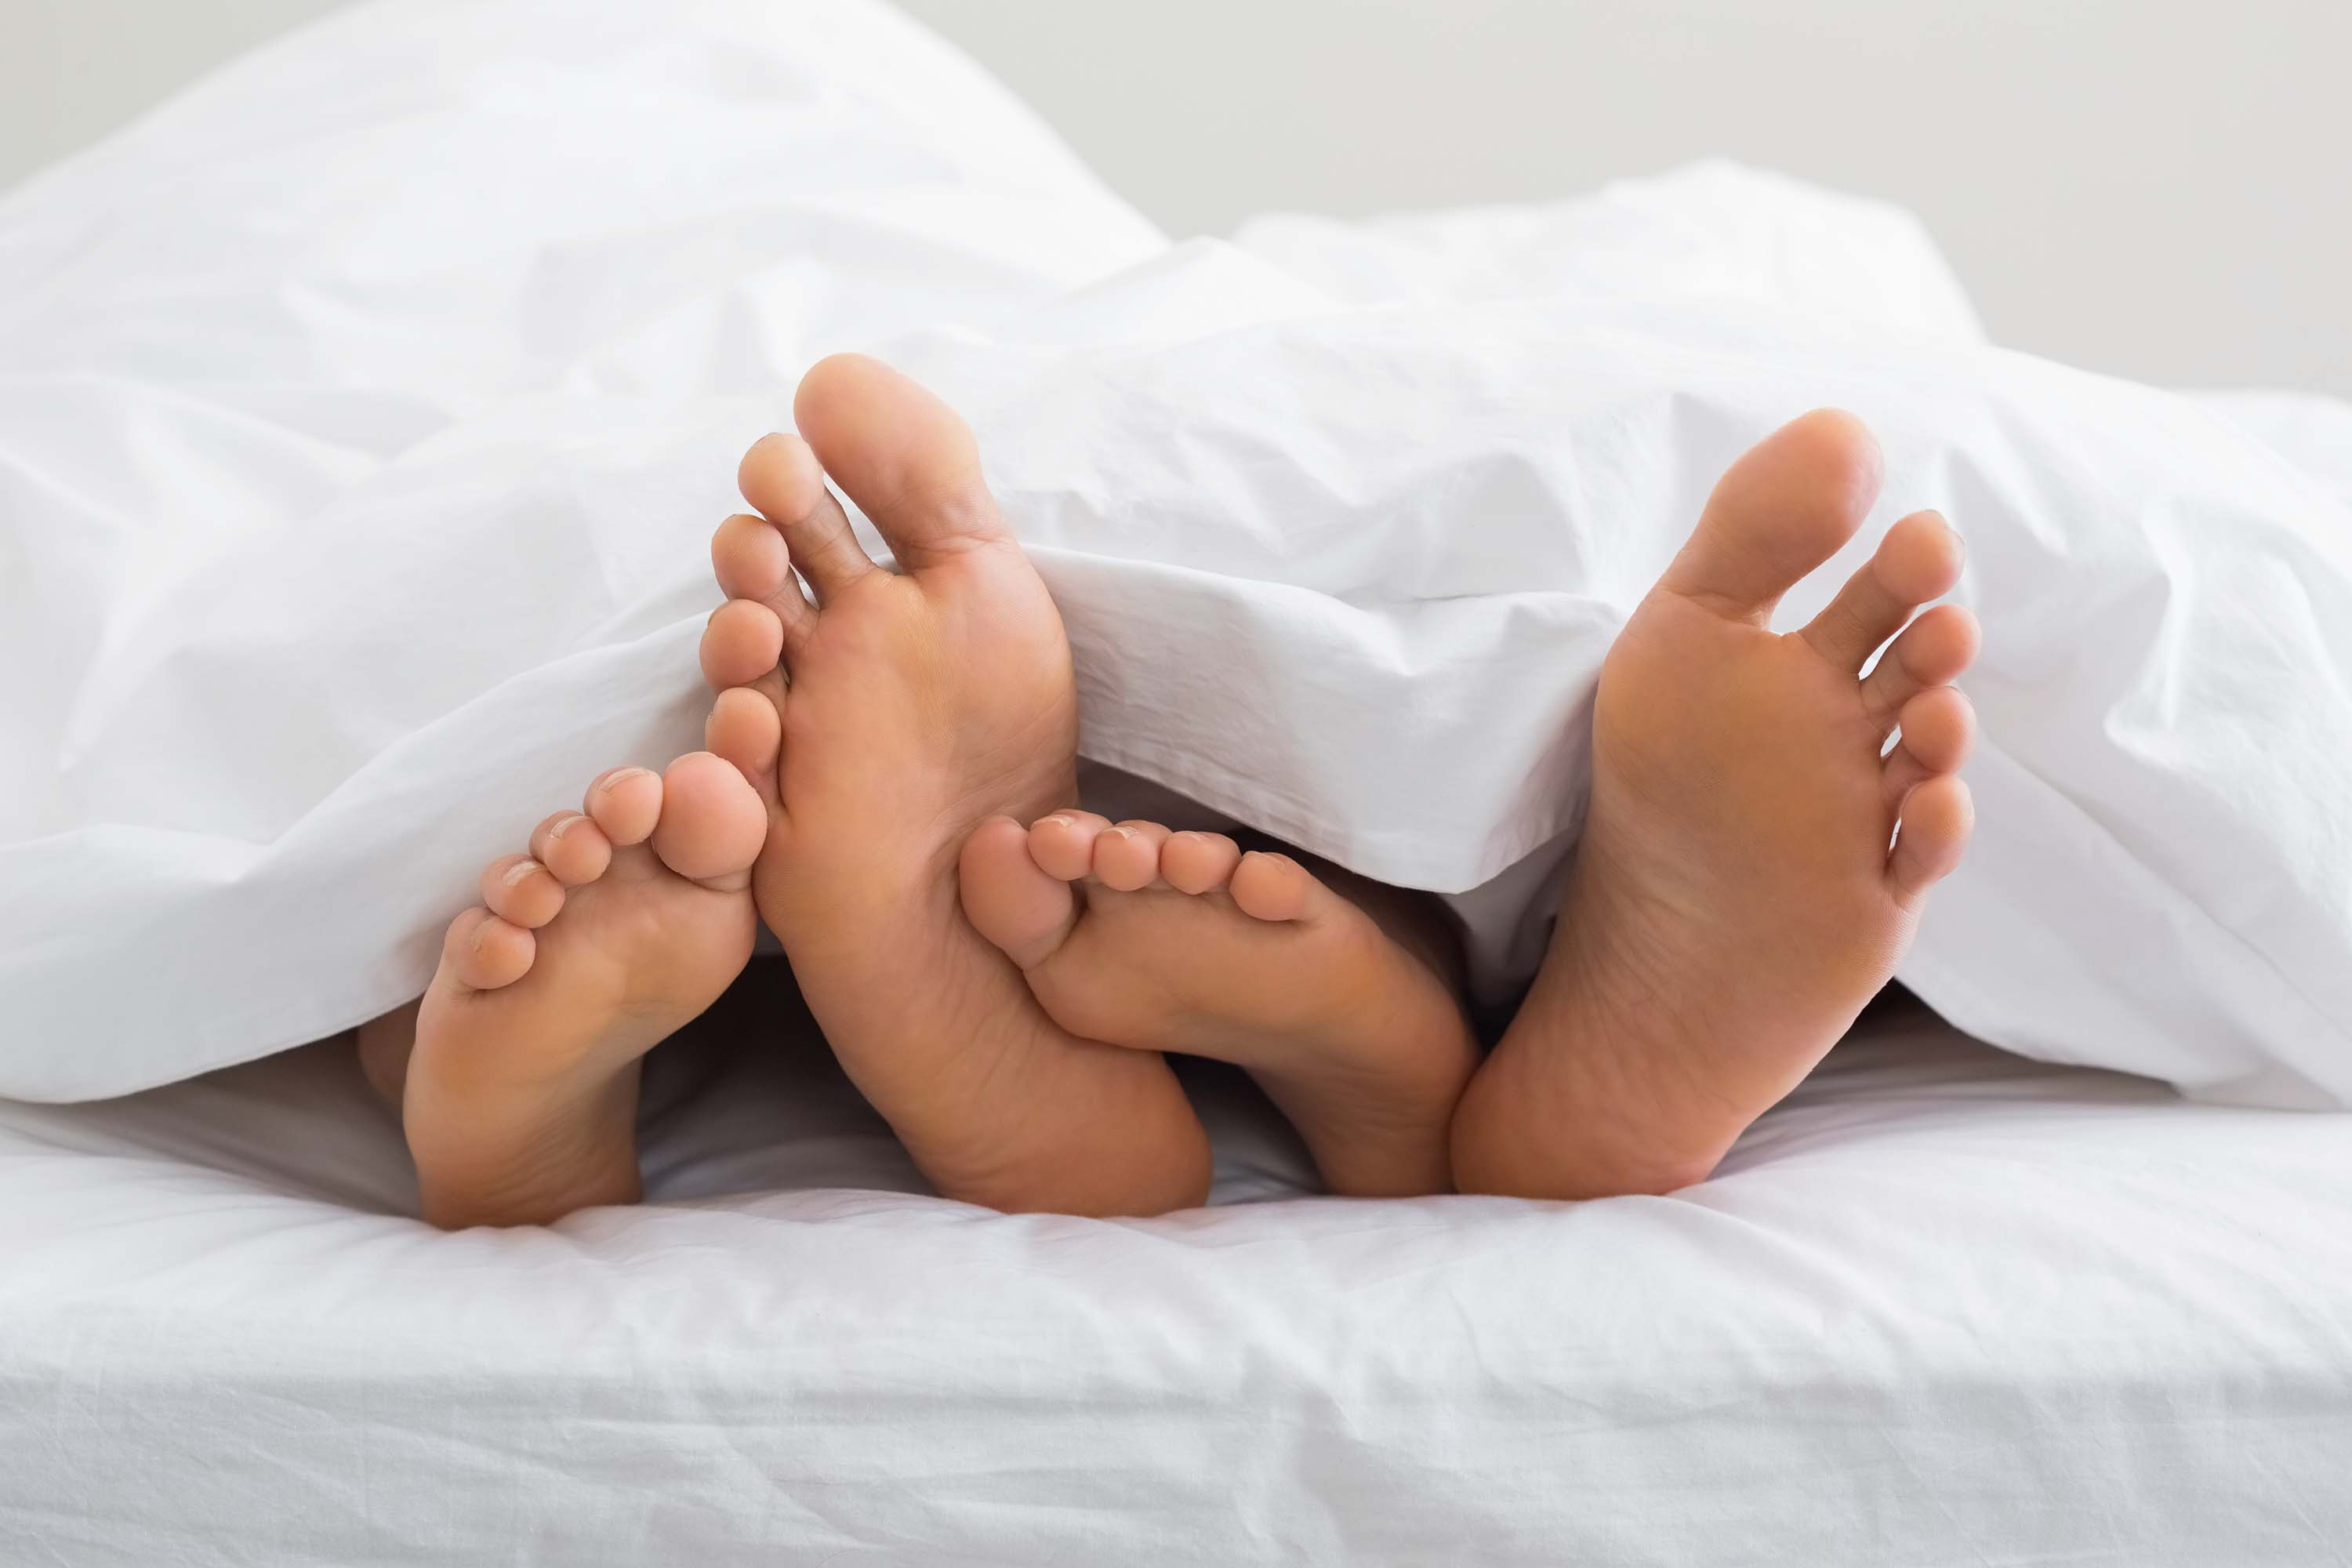 Drugged Asian Porn Feet - About 1 in 4 Japanese adults in their 20s and 30s is a virgin, study says |  CNN